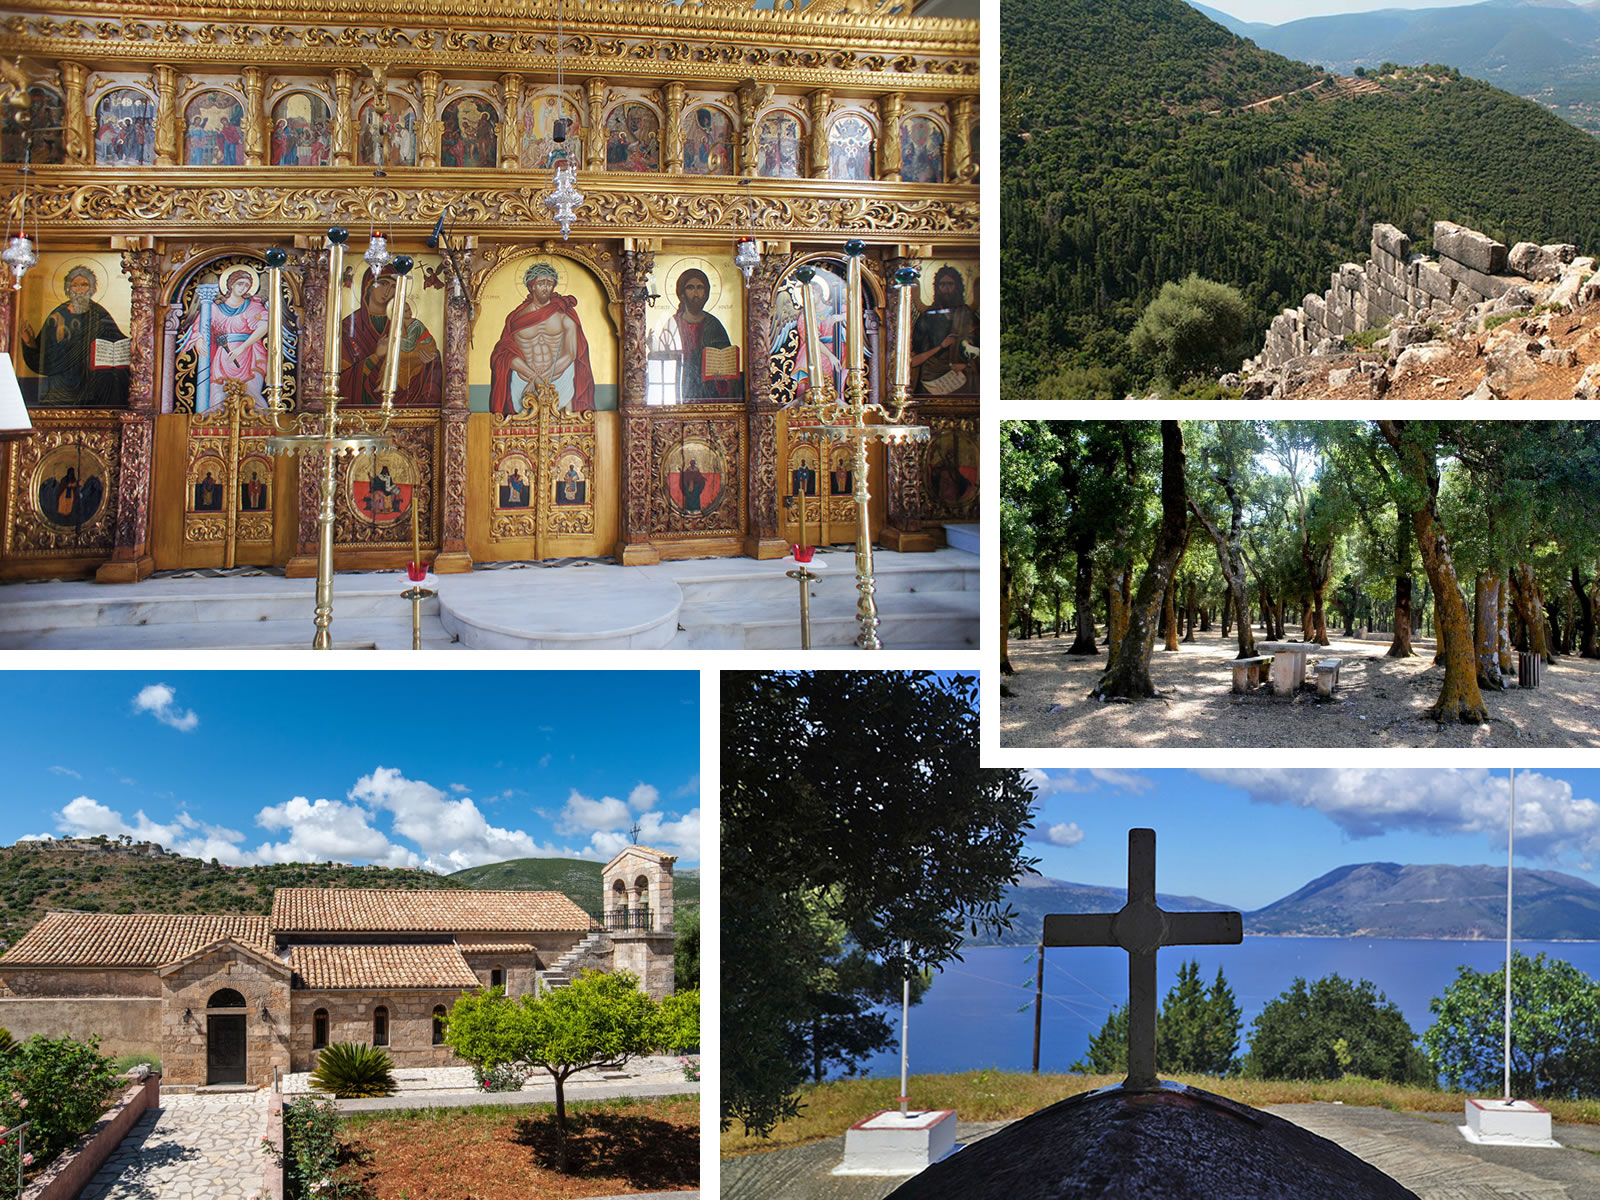 The monuments of Kefalonia